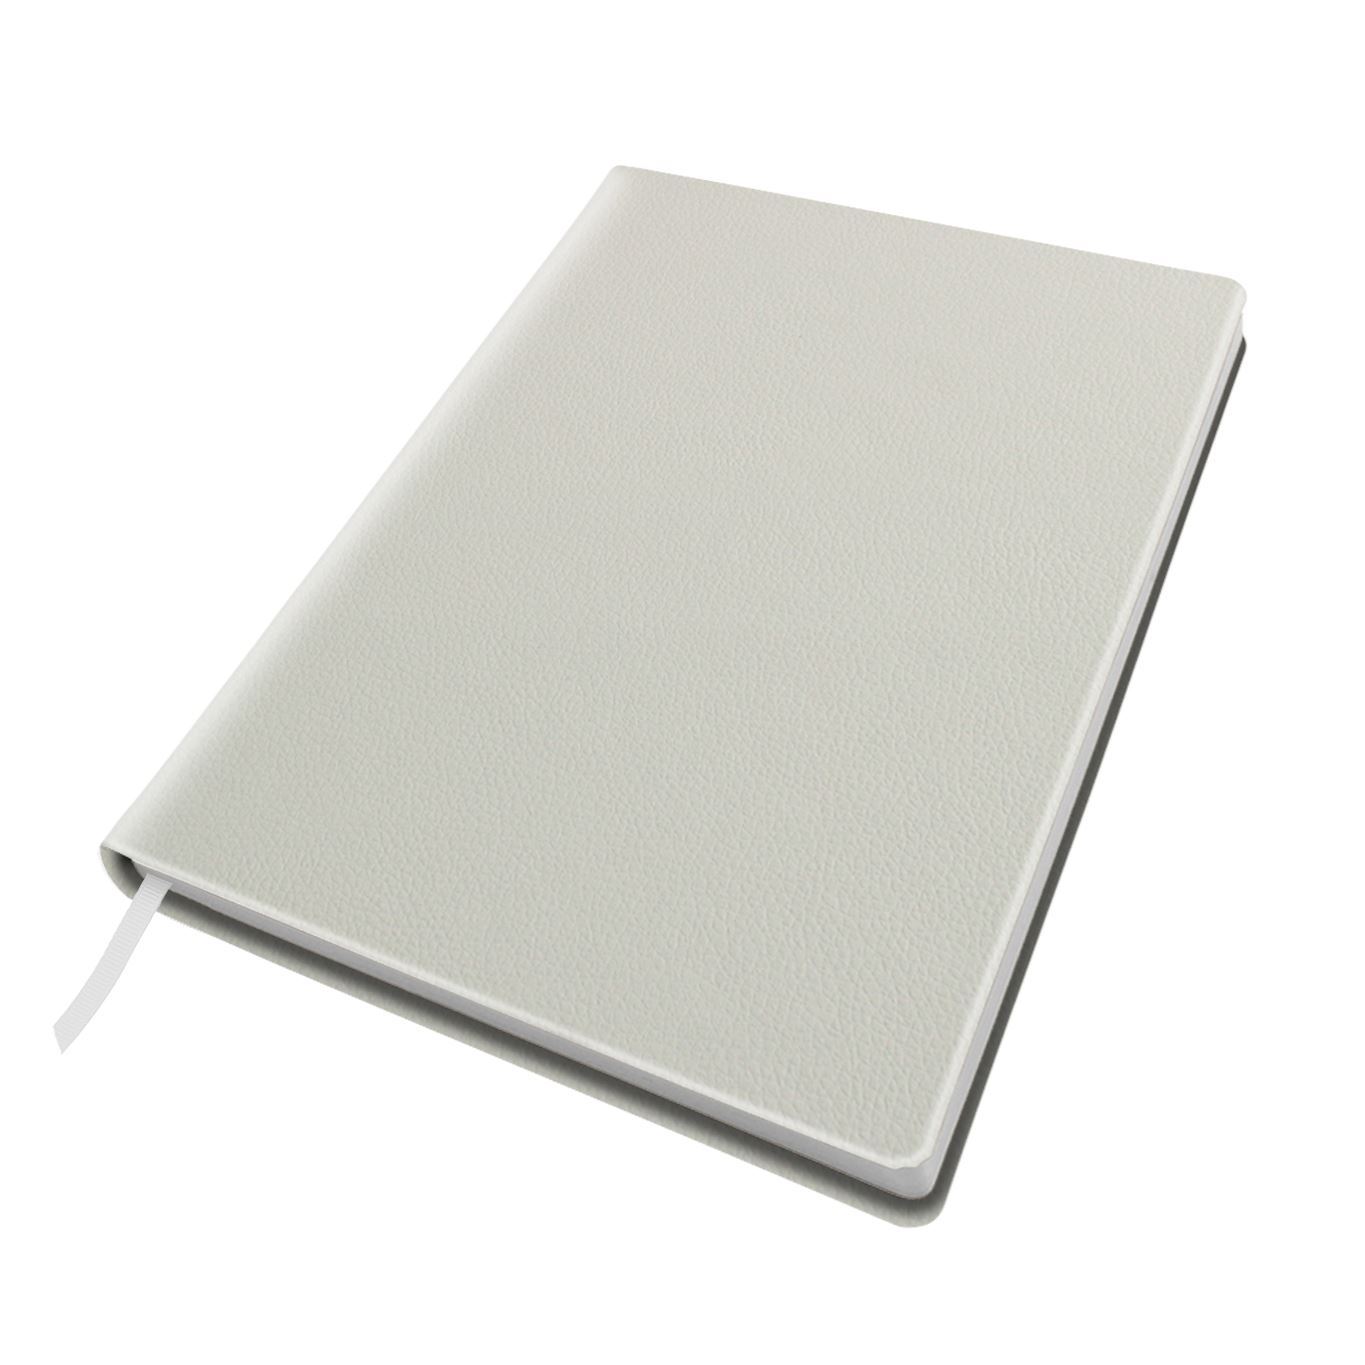 Recycled Como Quarto Casebound Notebook choose from 5 colours in vegan Recycled Como.